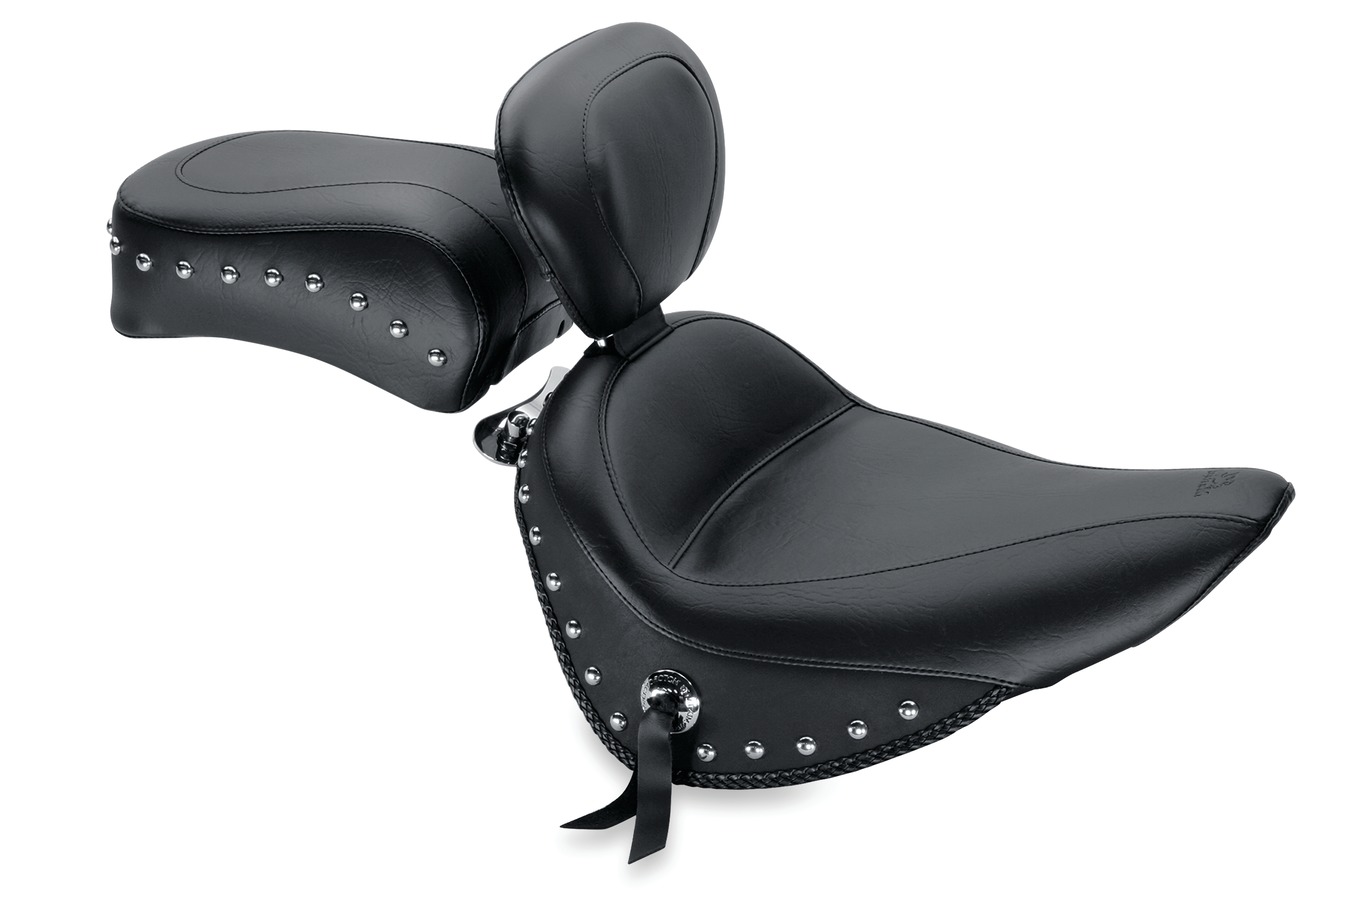 Standard Touring Solo Seat with Driver Backrest for Harley-Davidson Softail Softail Standard Rear Tire 2000-